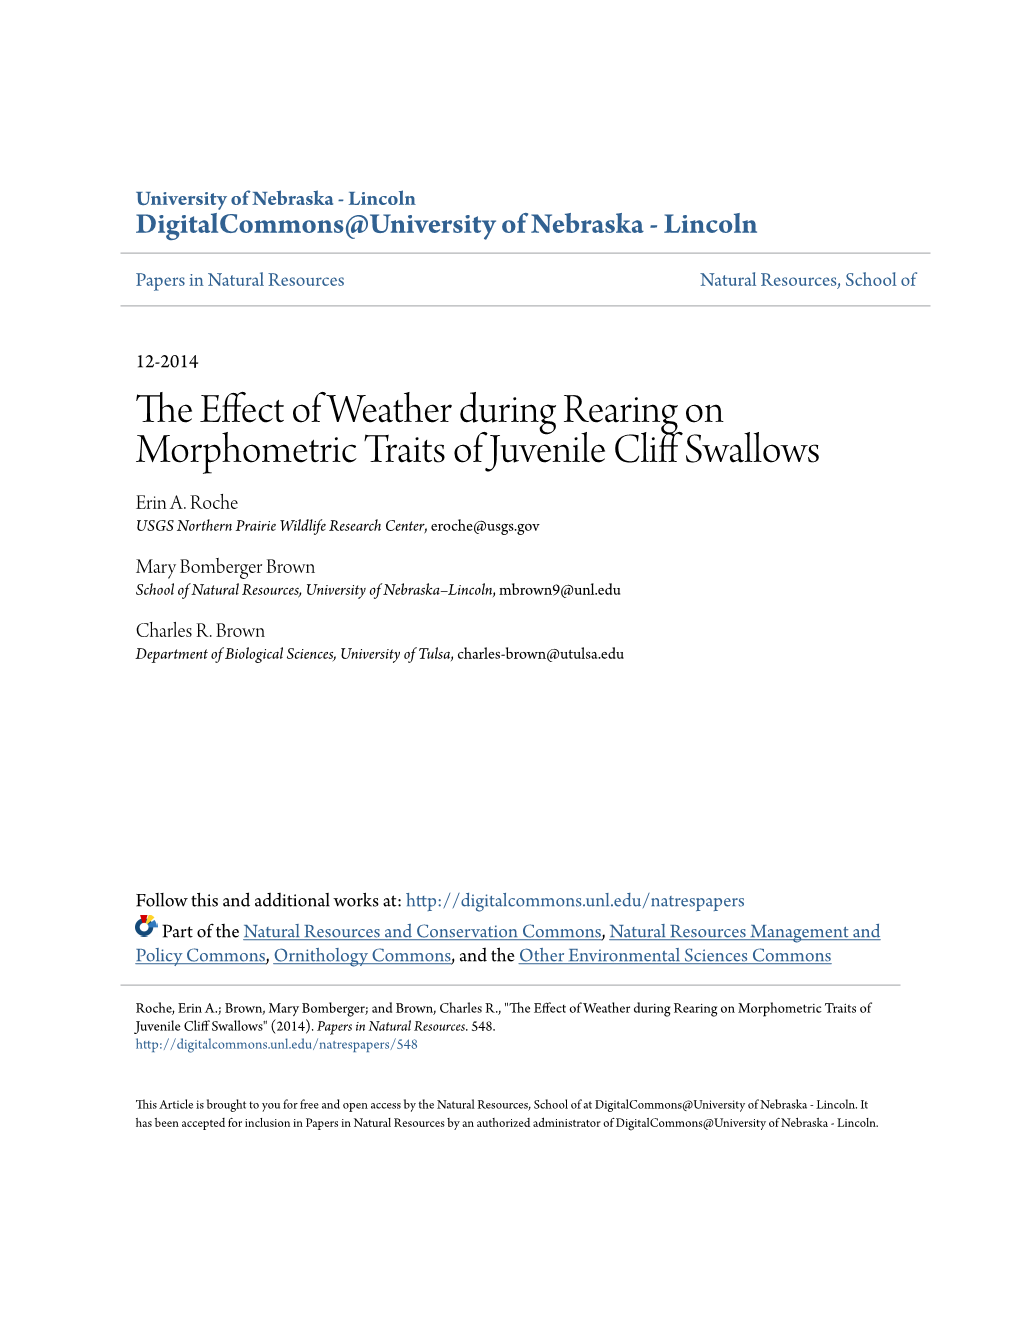 The Effect of Weather During Rearing on Morphometric Traits of Juvenile Cliff Ws Allows" (2014)